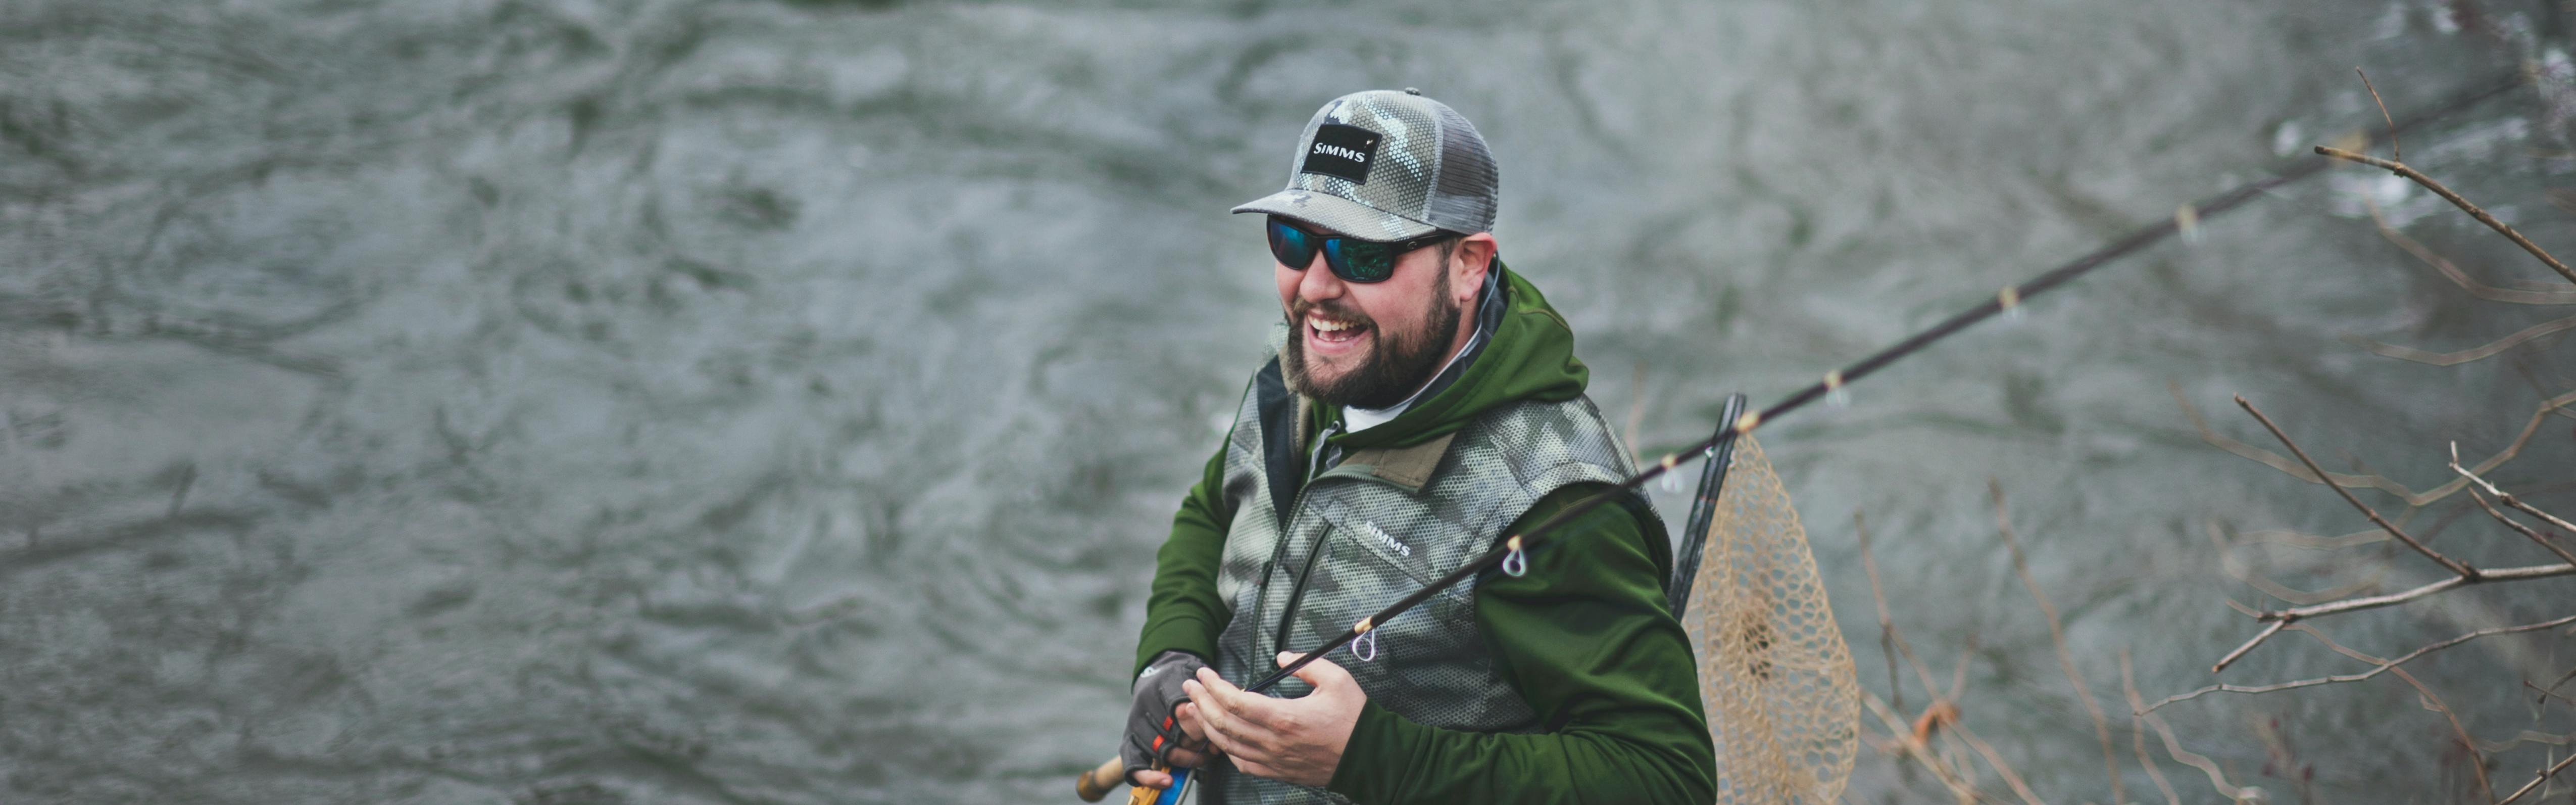 Fly Fishing Accessories You Shouldn't Go Without